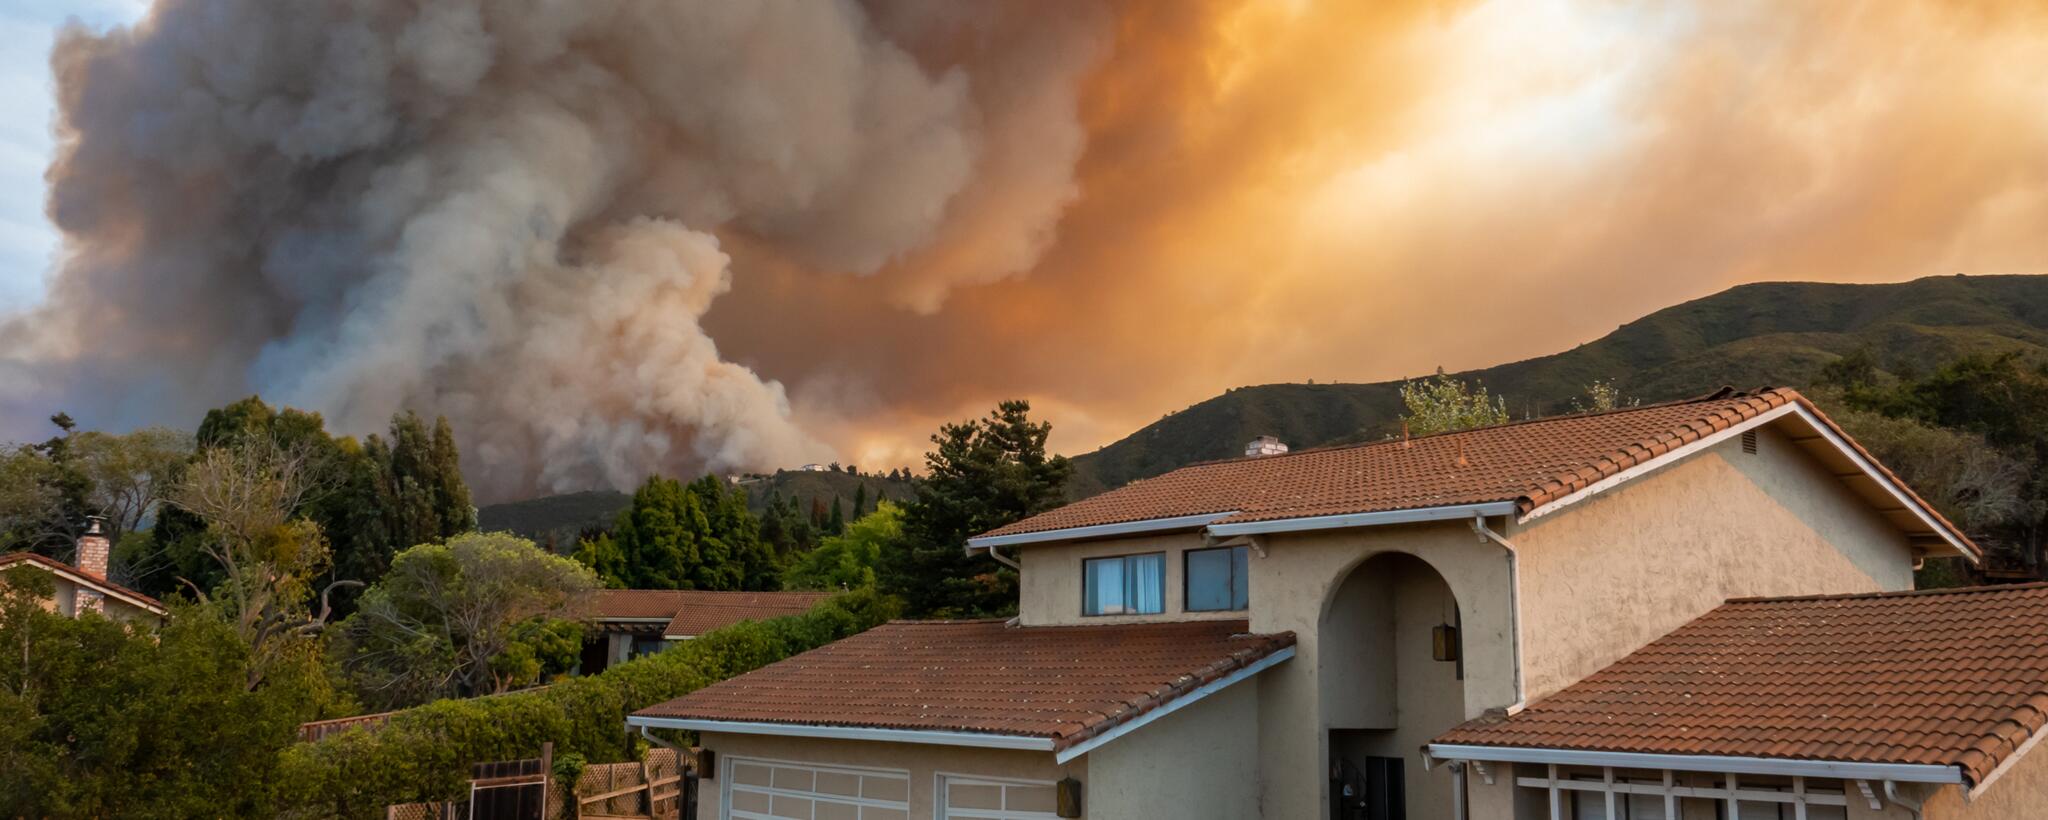 smoke from a wildfire in the background of a house